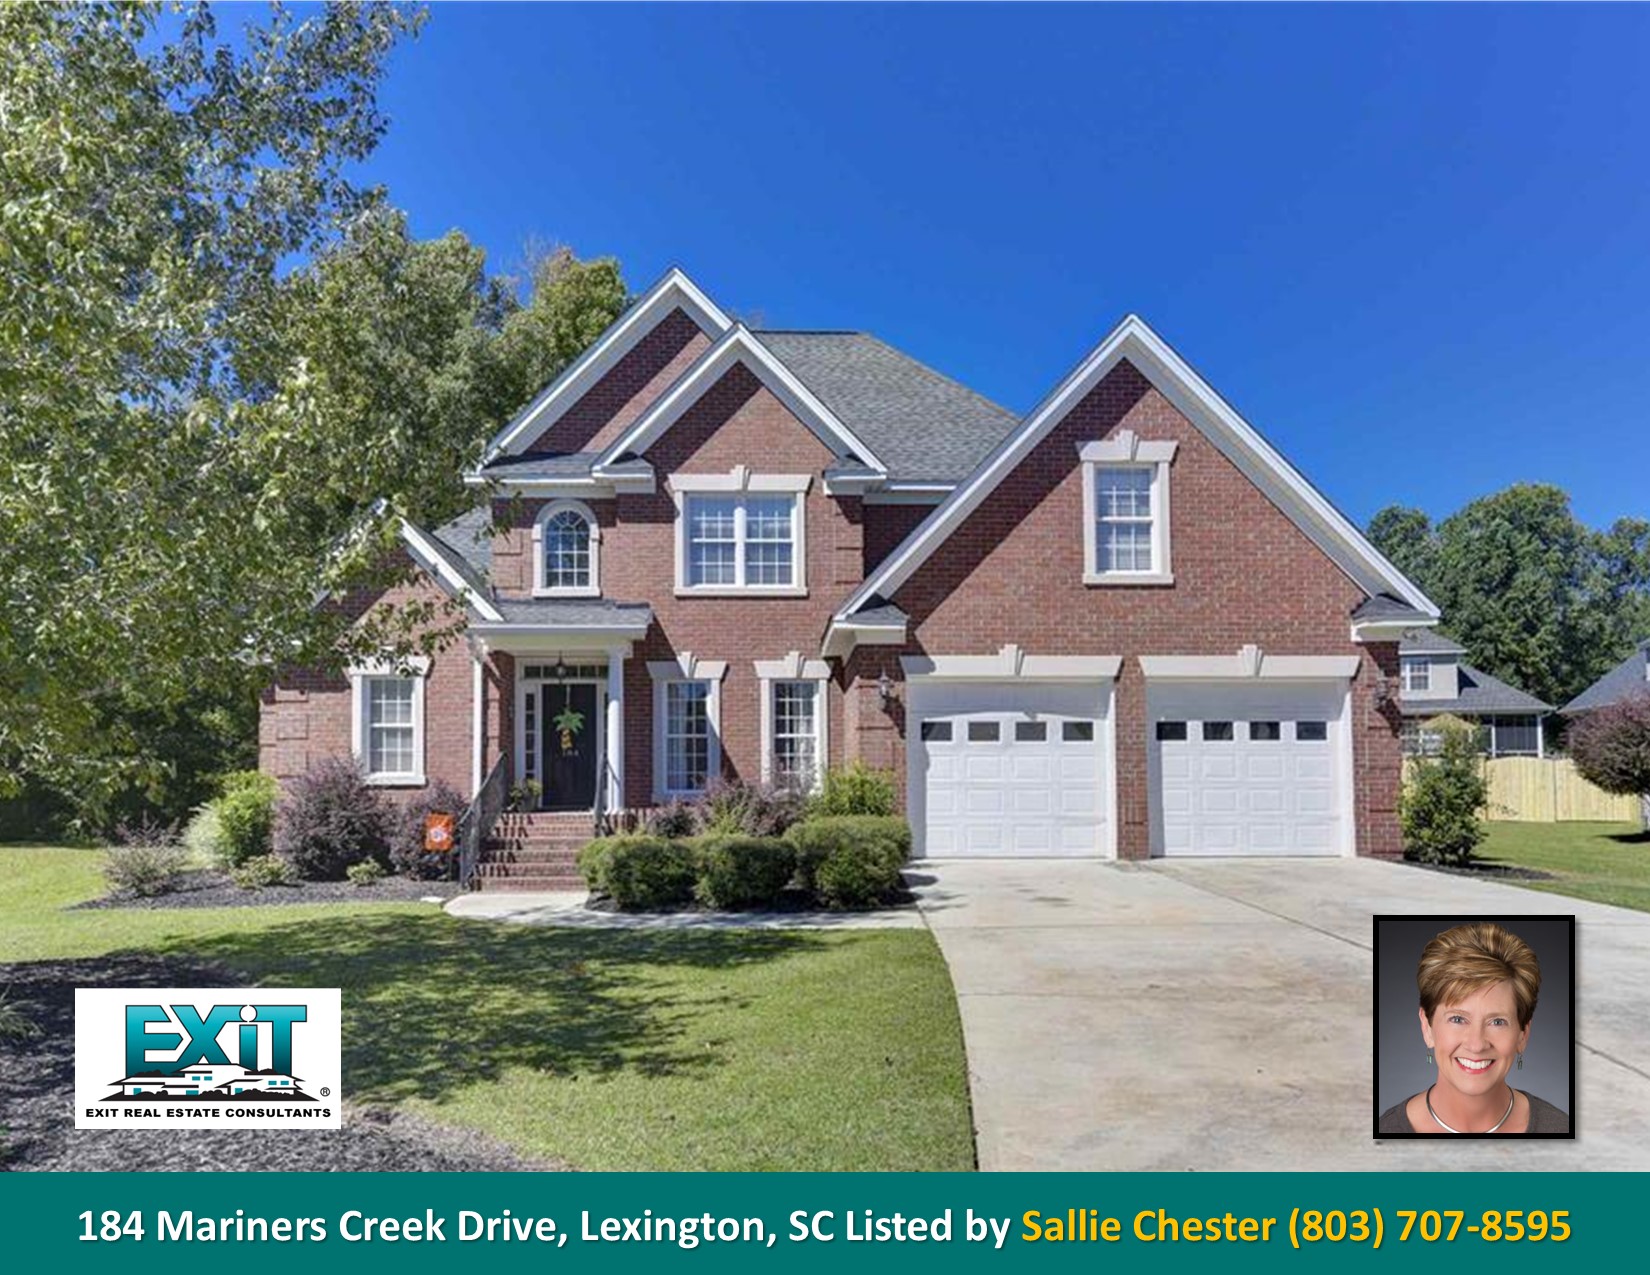 Just listed in Mariners Creek - Lexington